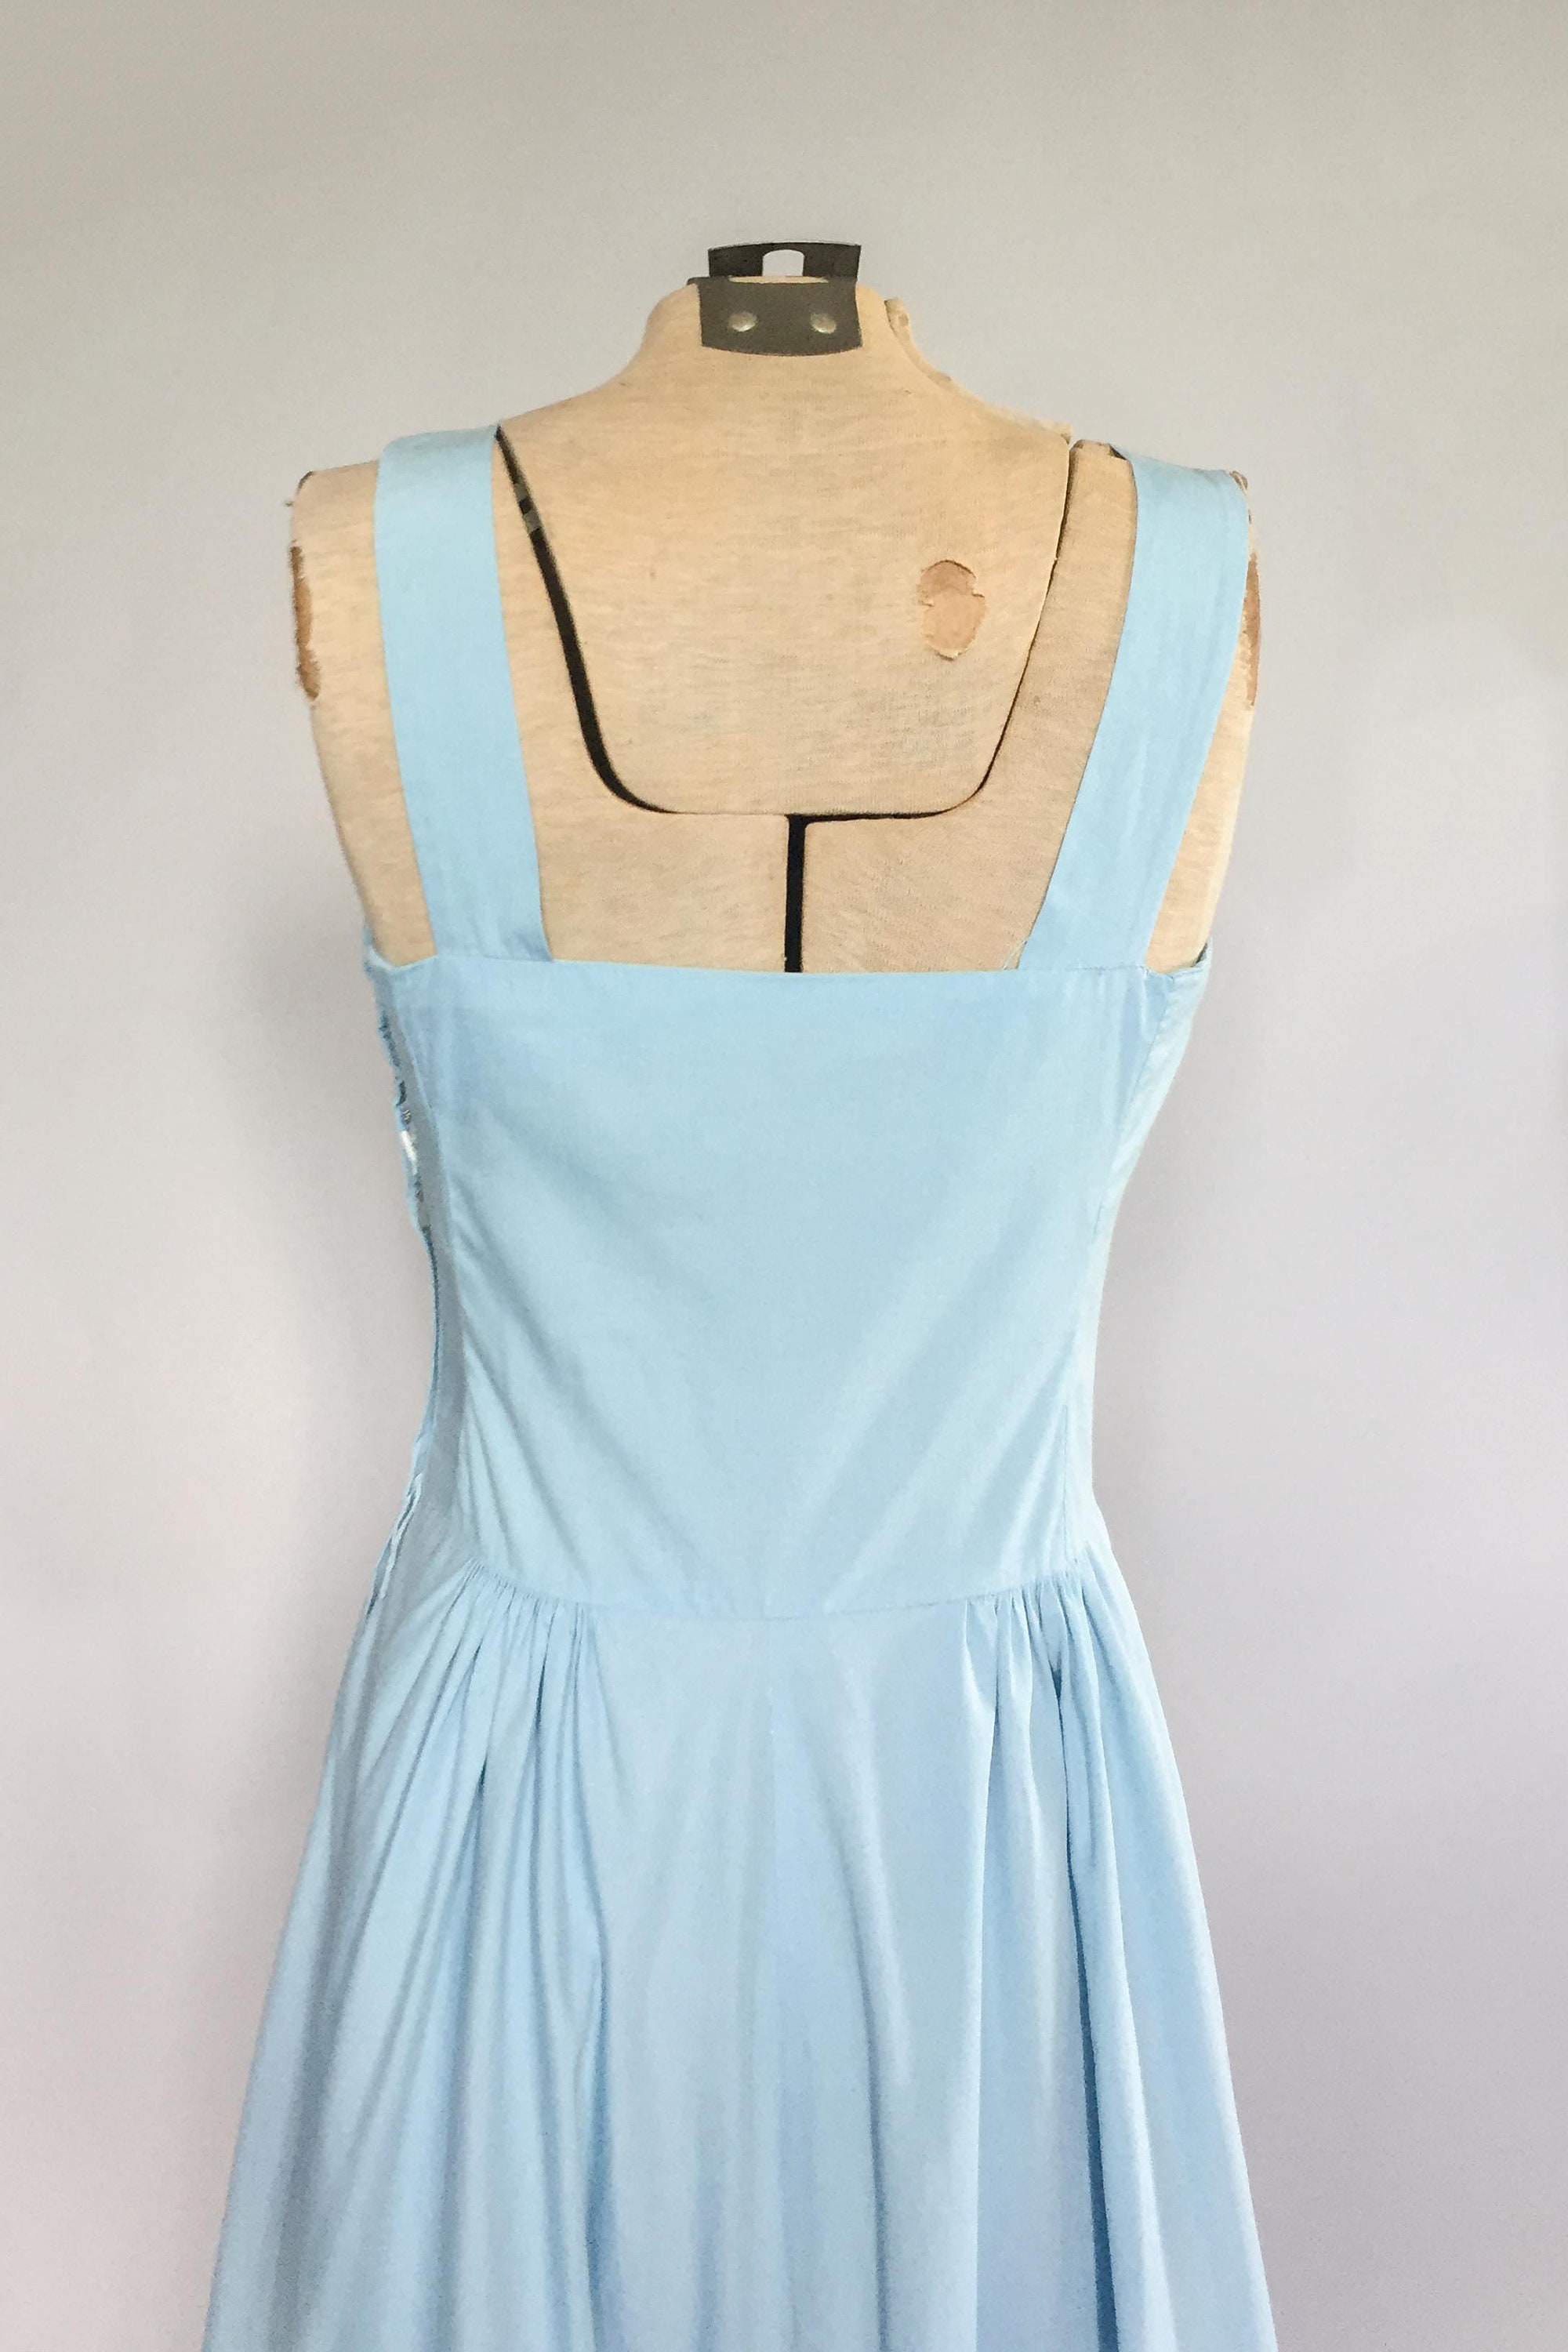 Vintage 1940s dress / 40s dress / baby blue collared pleated sleeveless ...